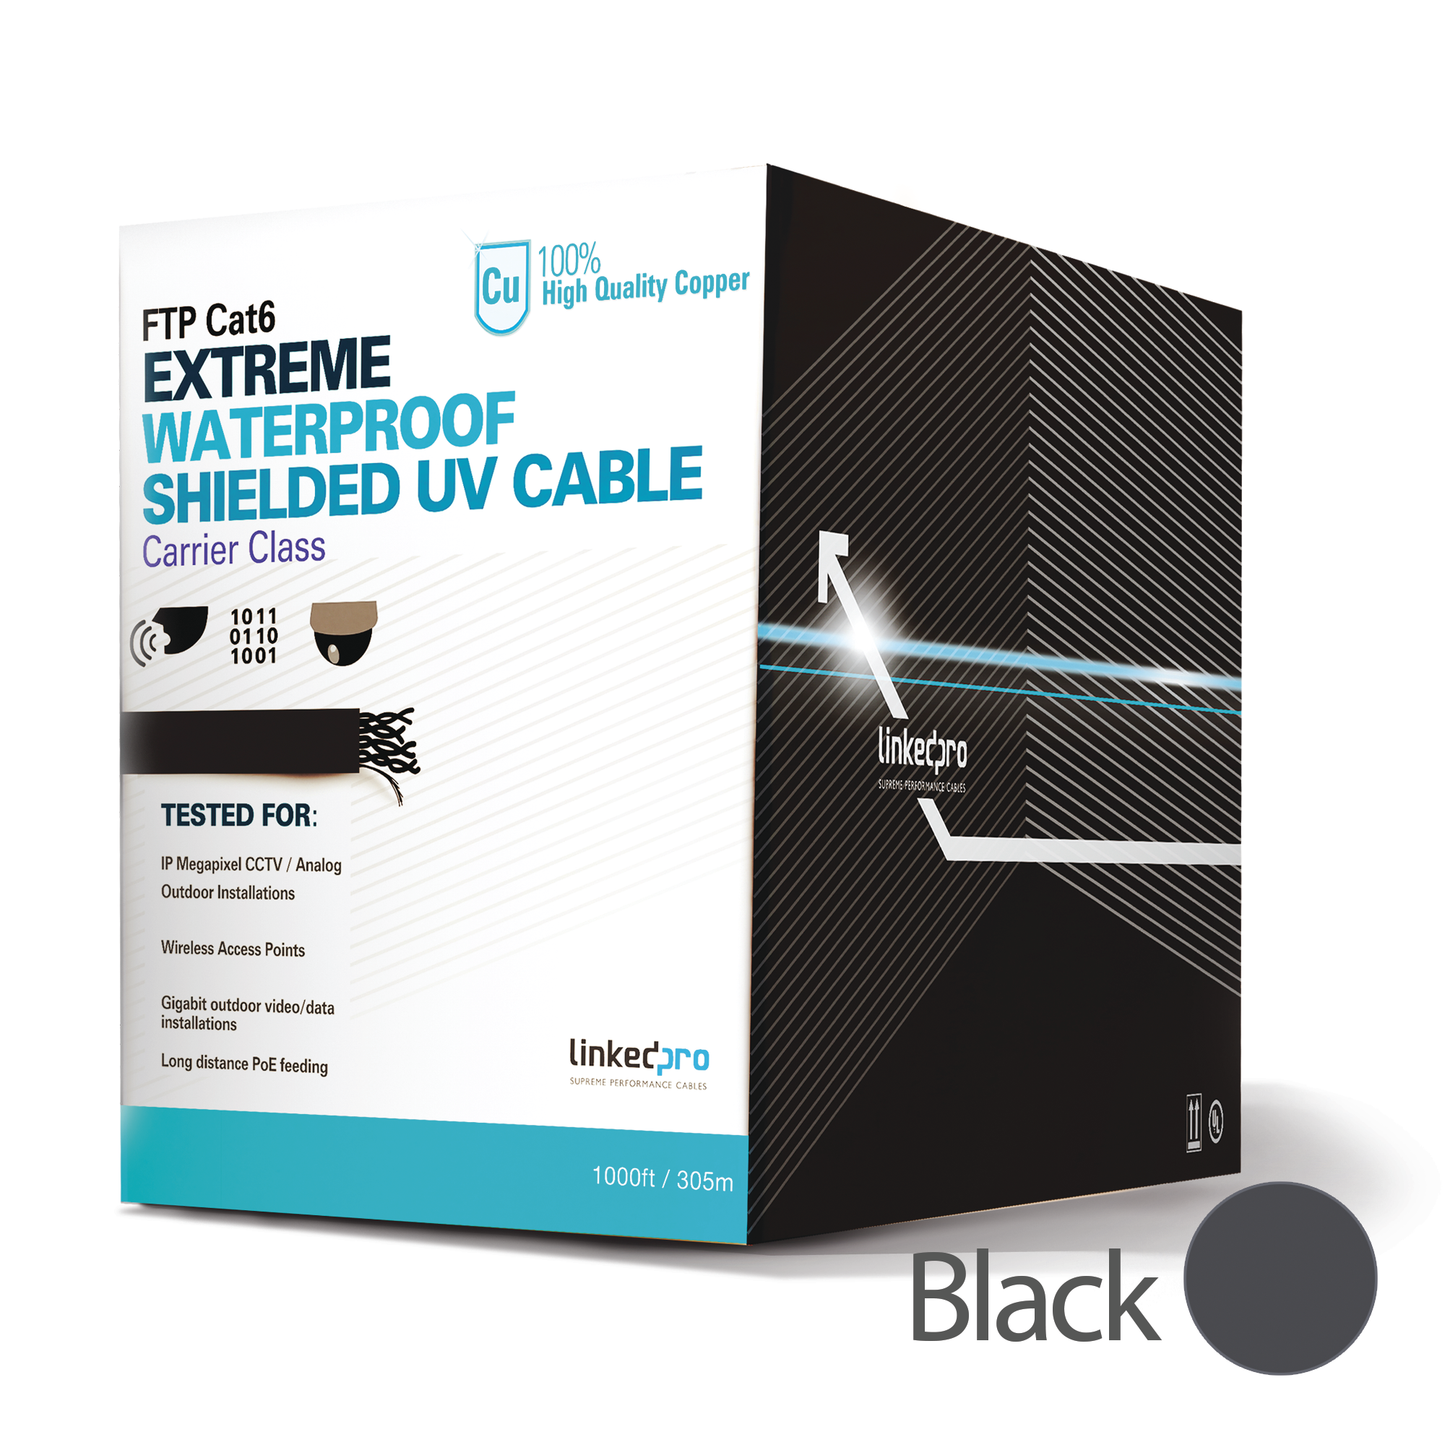 Cat6 UTP cable for outdoor, black, 1000 ft (305 m), unshielded, for video surveillance applications, data networks.